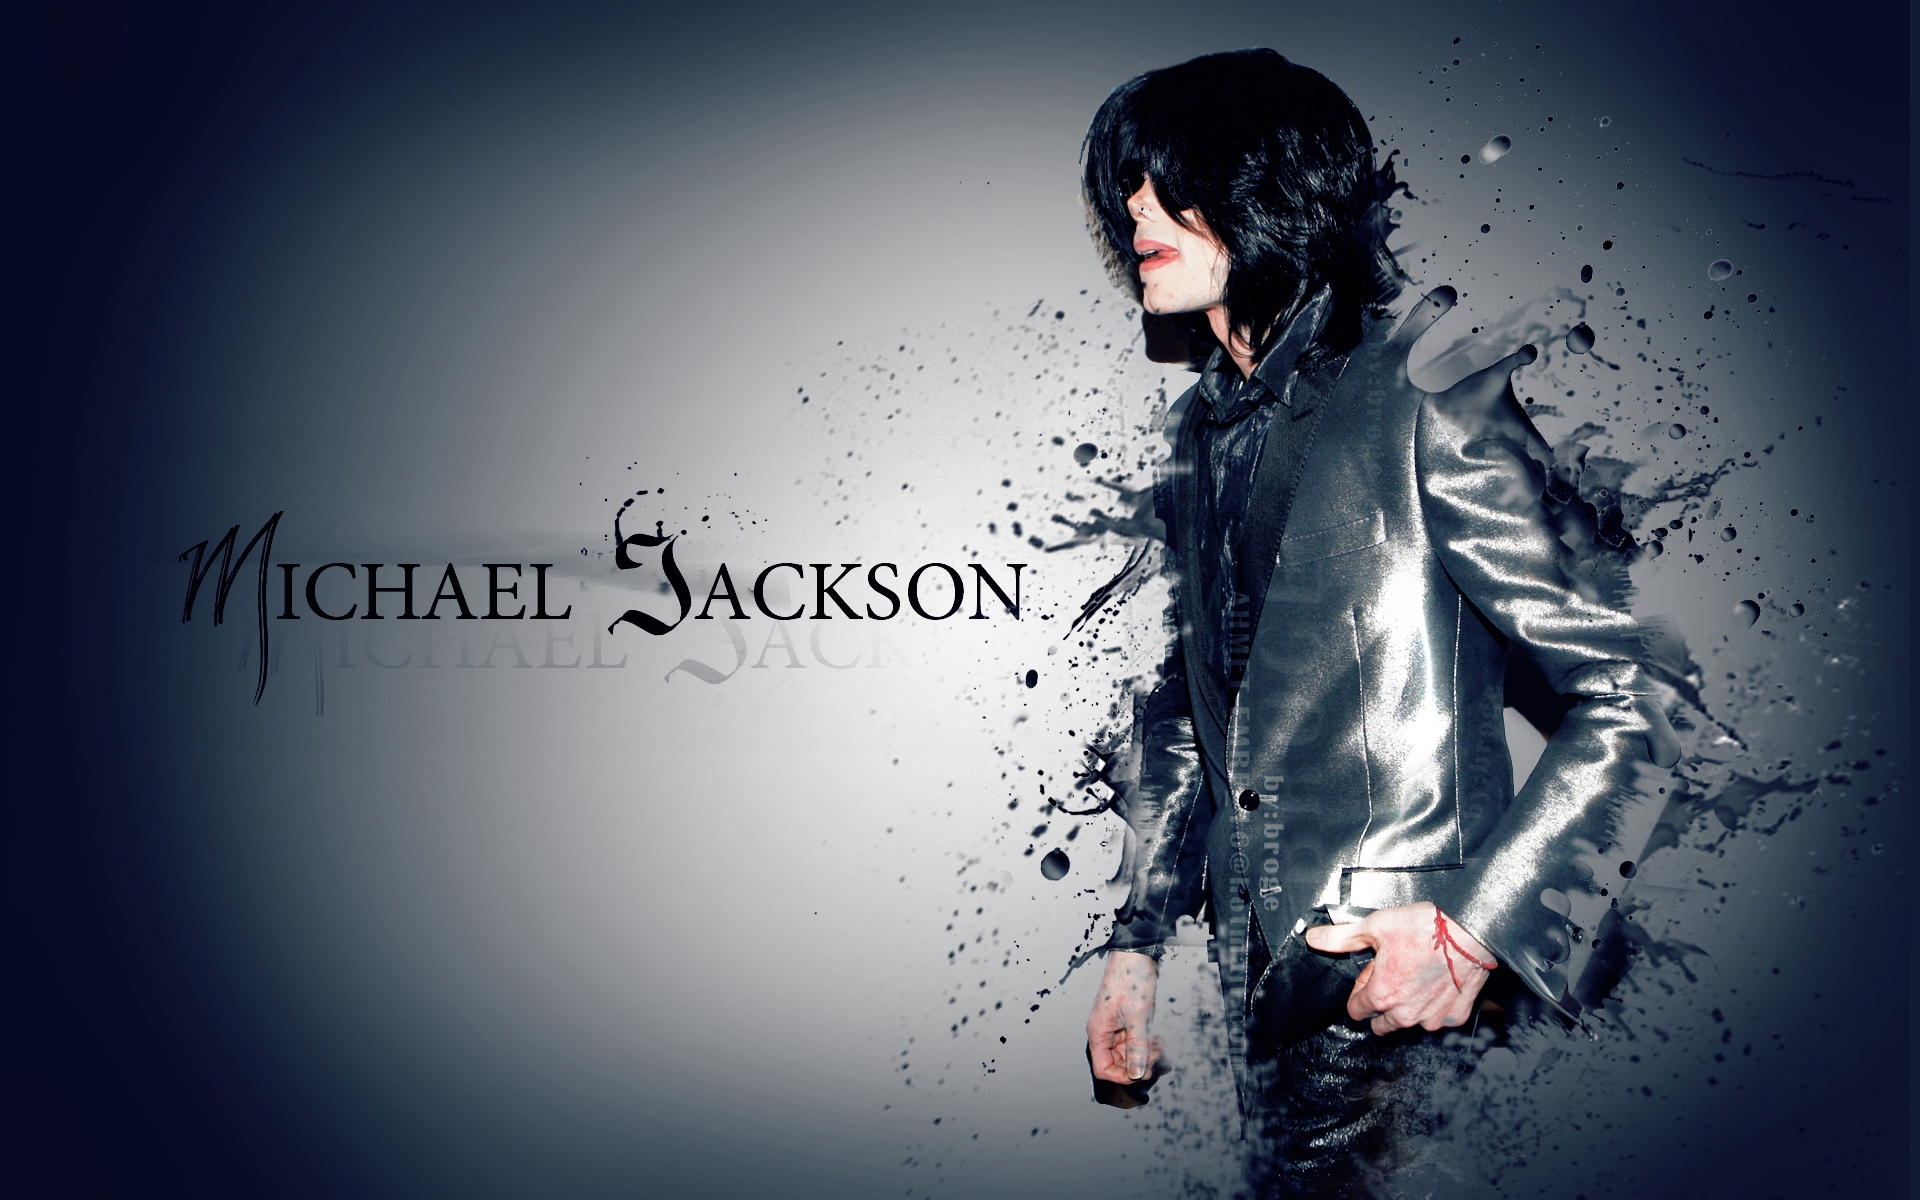 Free Download Best Music Wallpapers Michael Jackson Hd Wallpaper 19x10 For Your Desktop Mobile Tablet Explore 68 Mj Wallpaper Hd Michael Jackson Wallpapers And Screensavers Michael Jackson Wallpapers Free